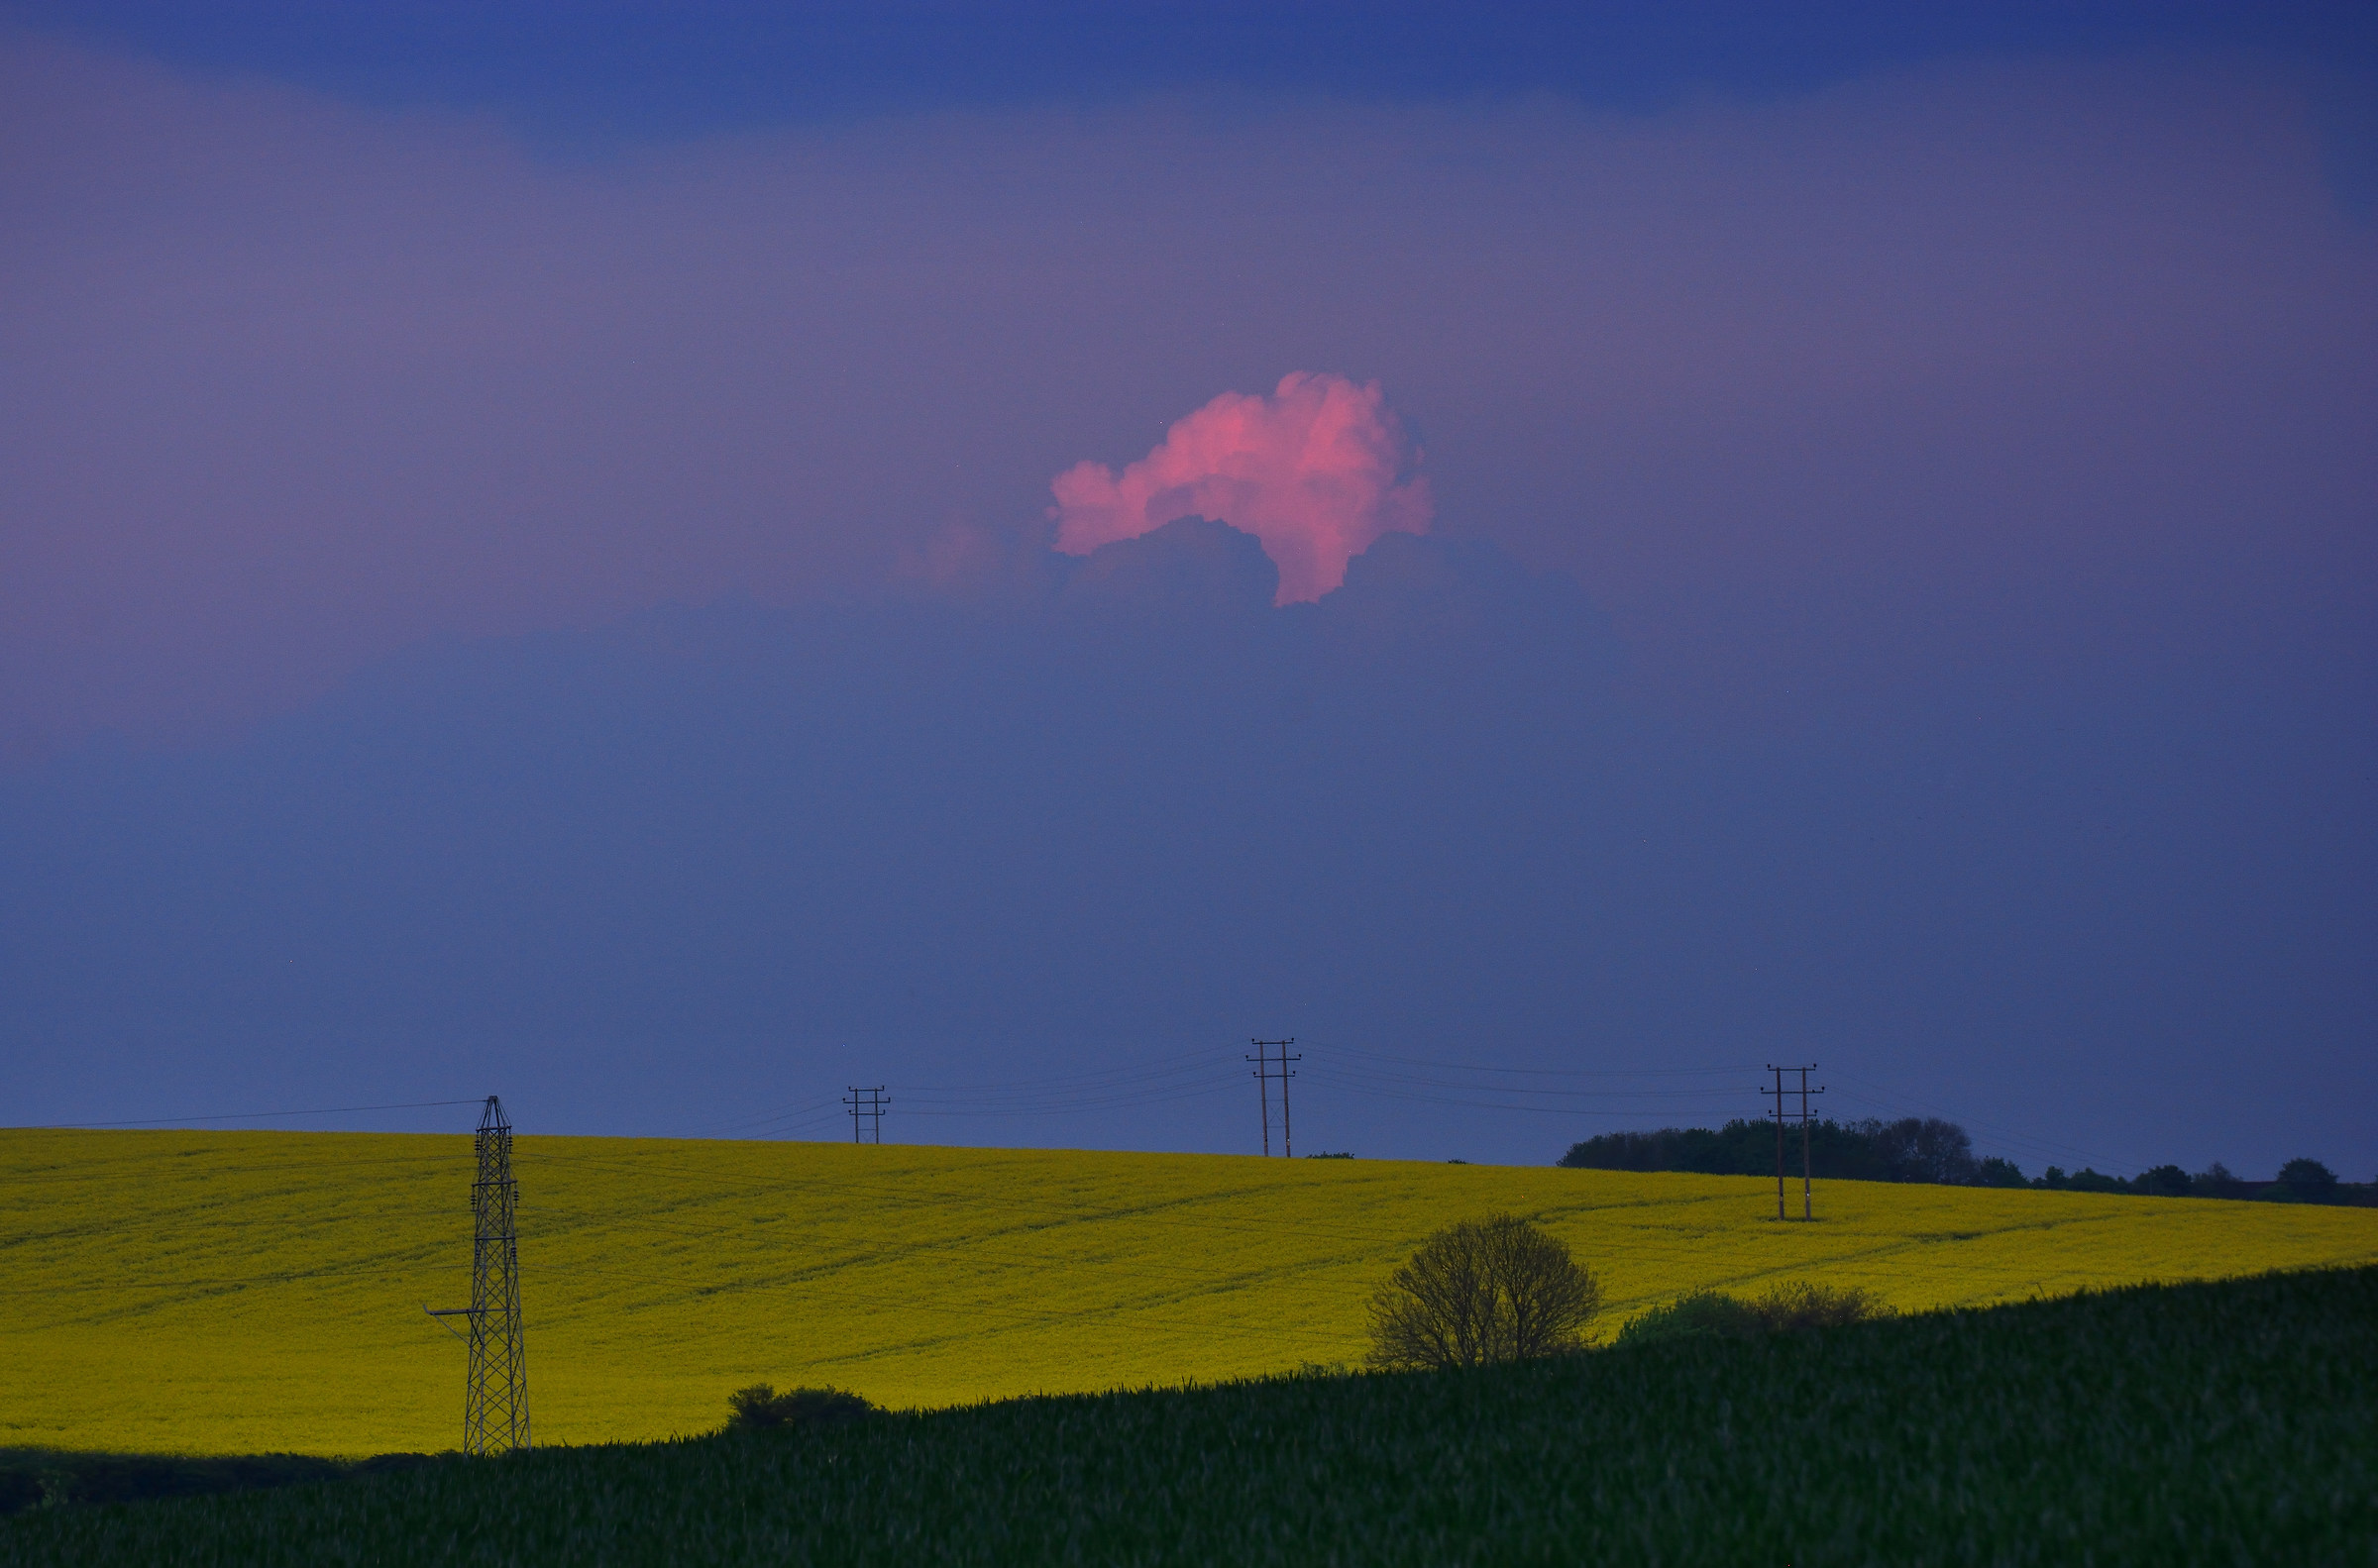 The Pink Cloud (Layers at Dusk)...